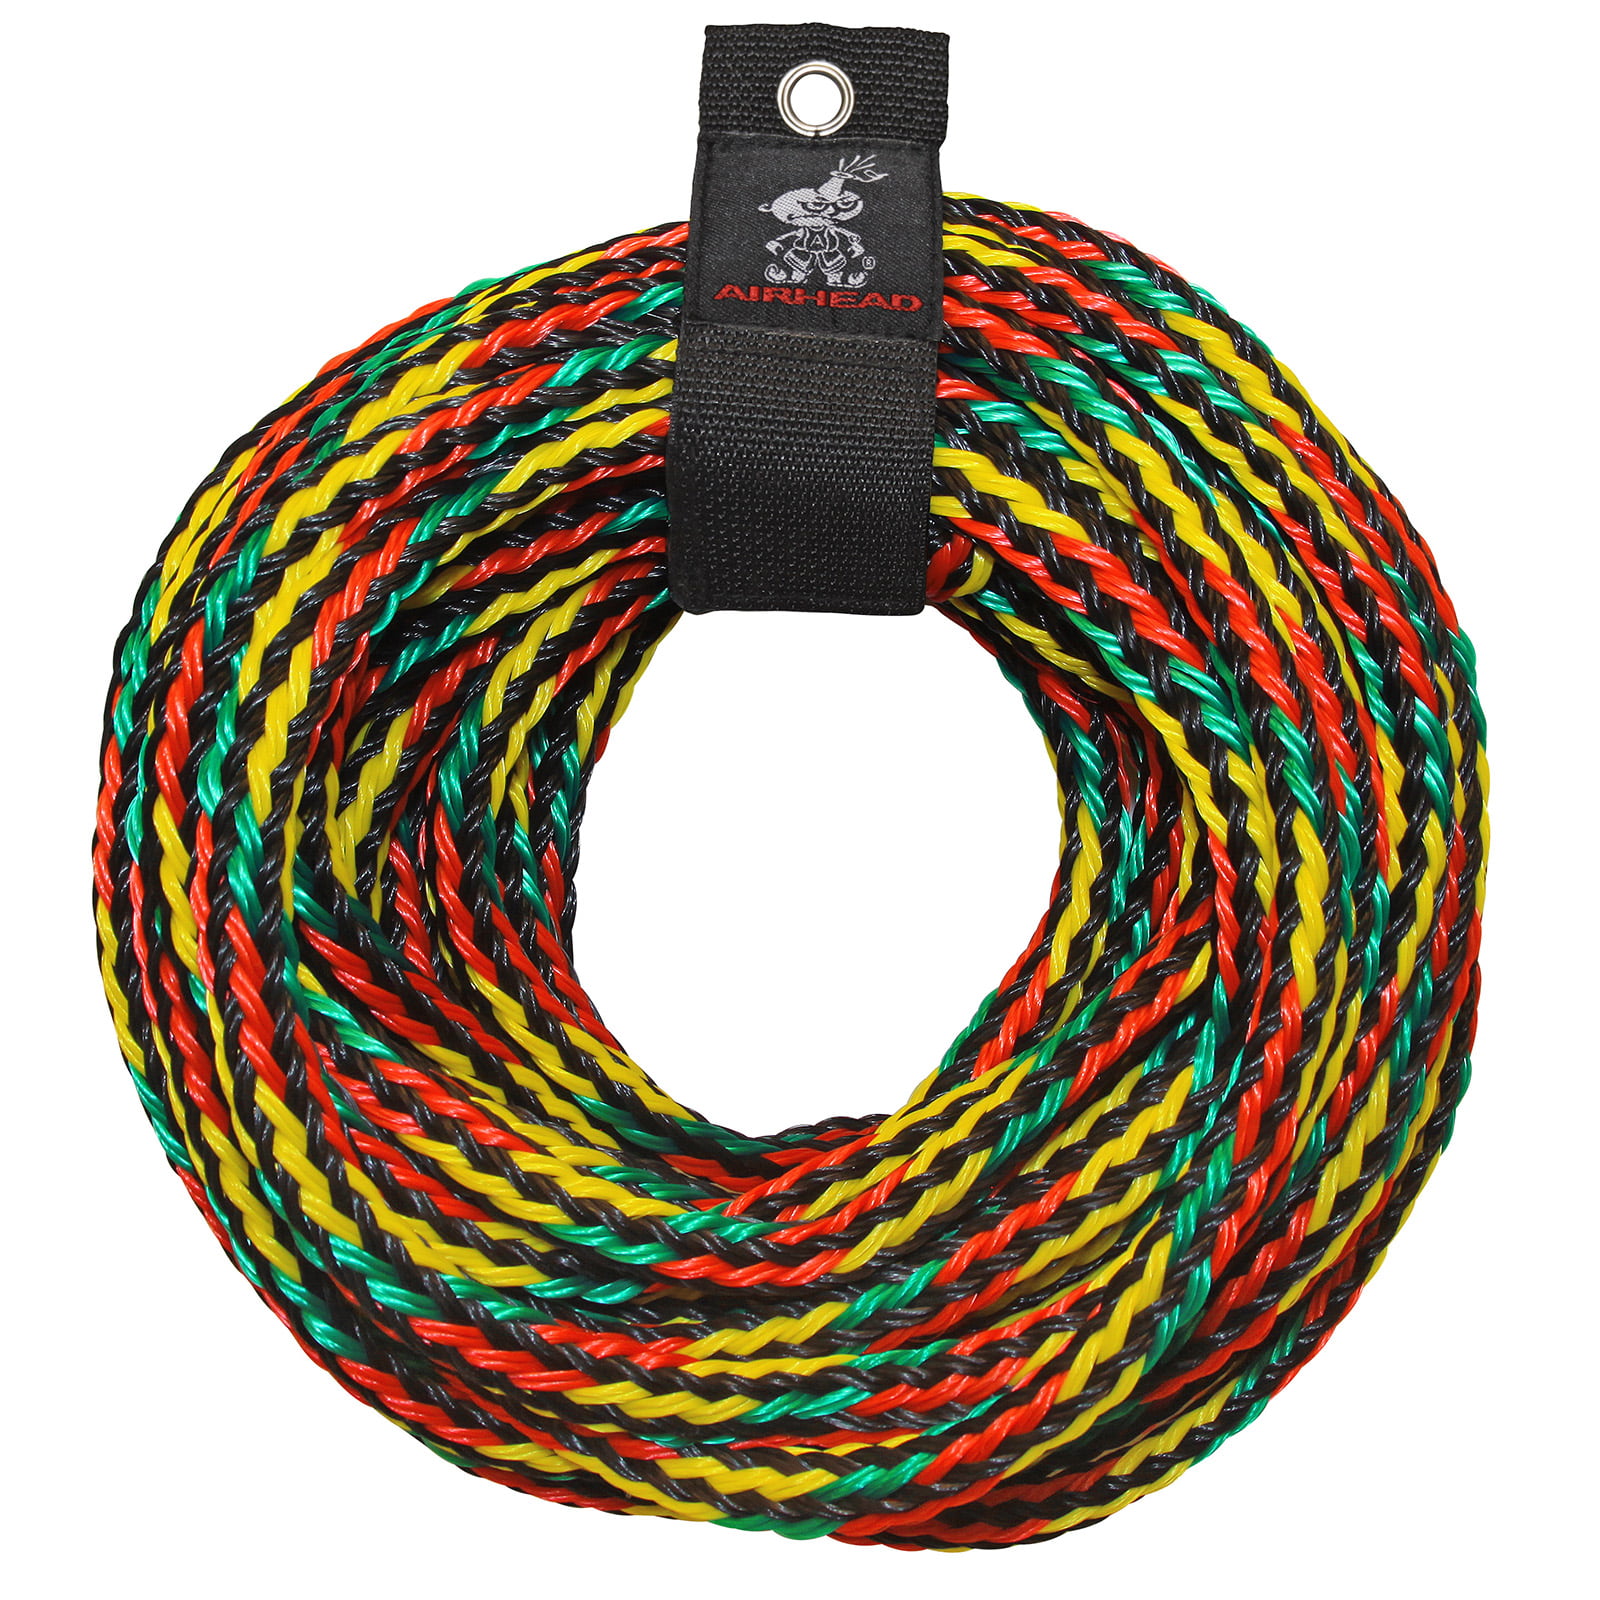 Jranter Elastic Wakeboard Water Ski Towing Rope for Motorboat Watersports Rope with Loops 